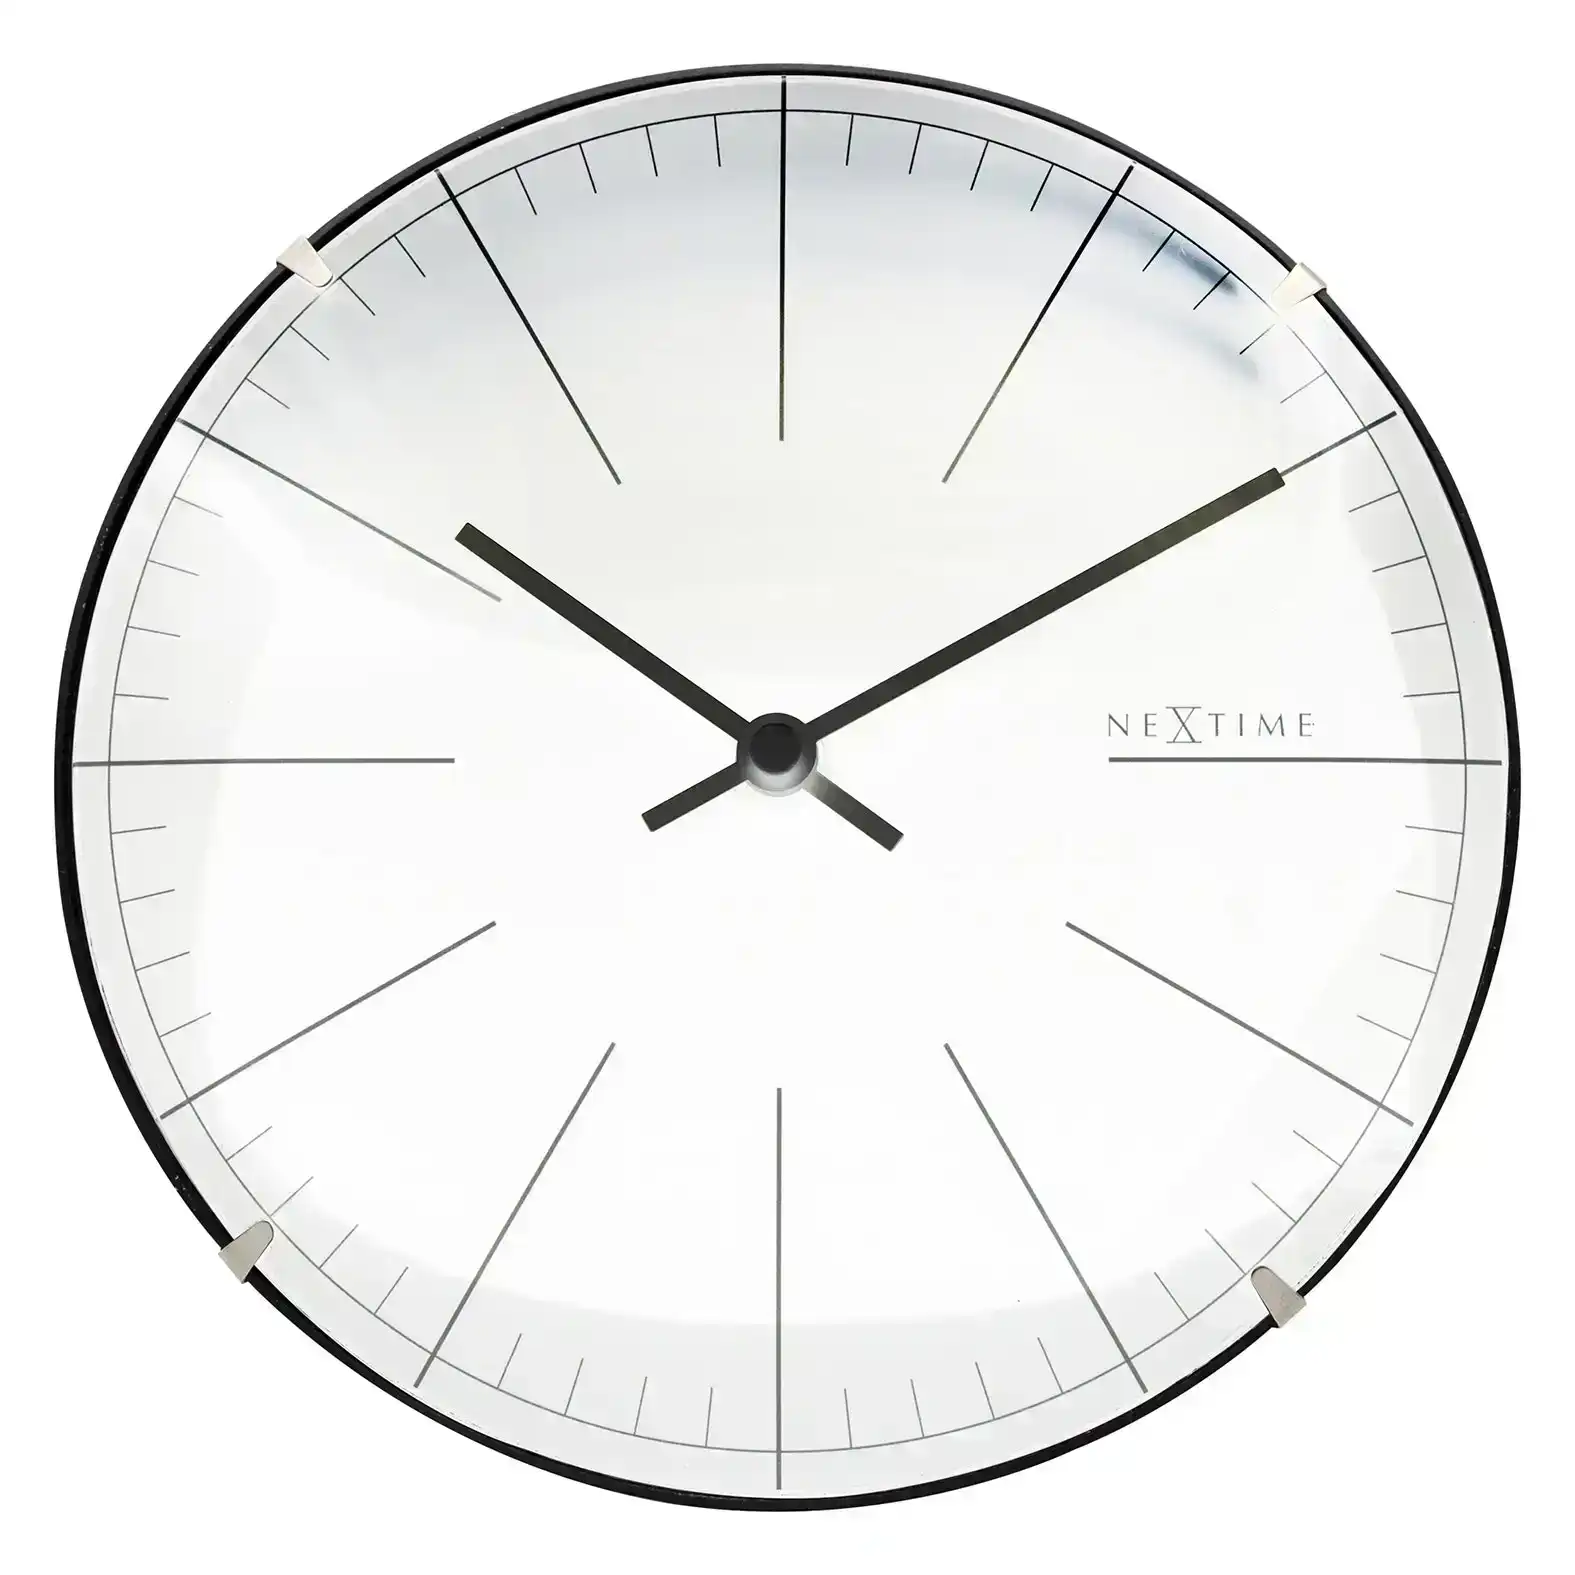 NeXtime 20cm Mini Dome Analogue Table/Wall Clock Round Home/Office Decor White